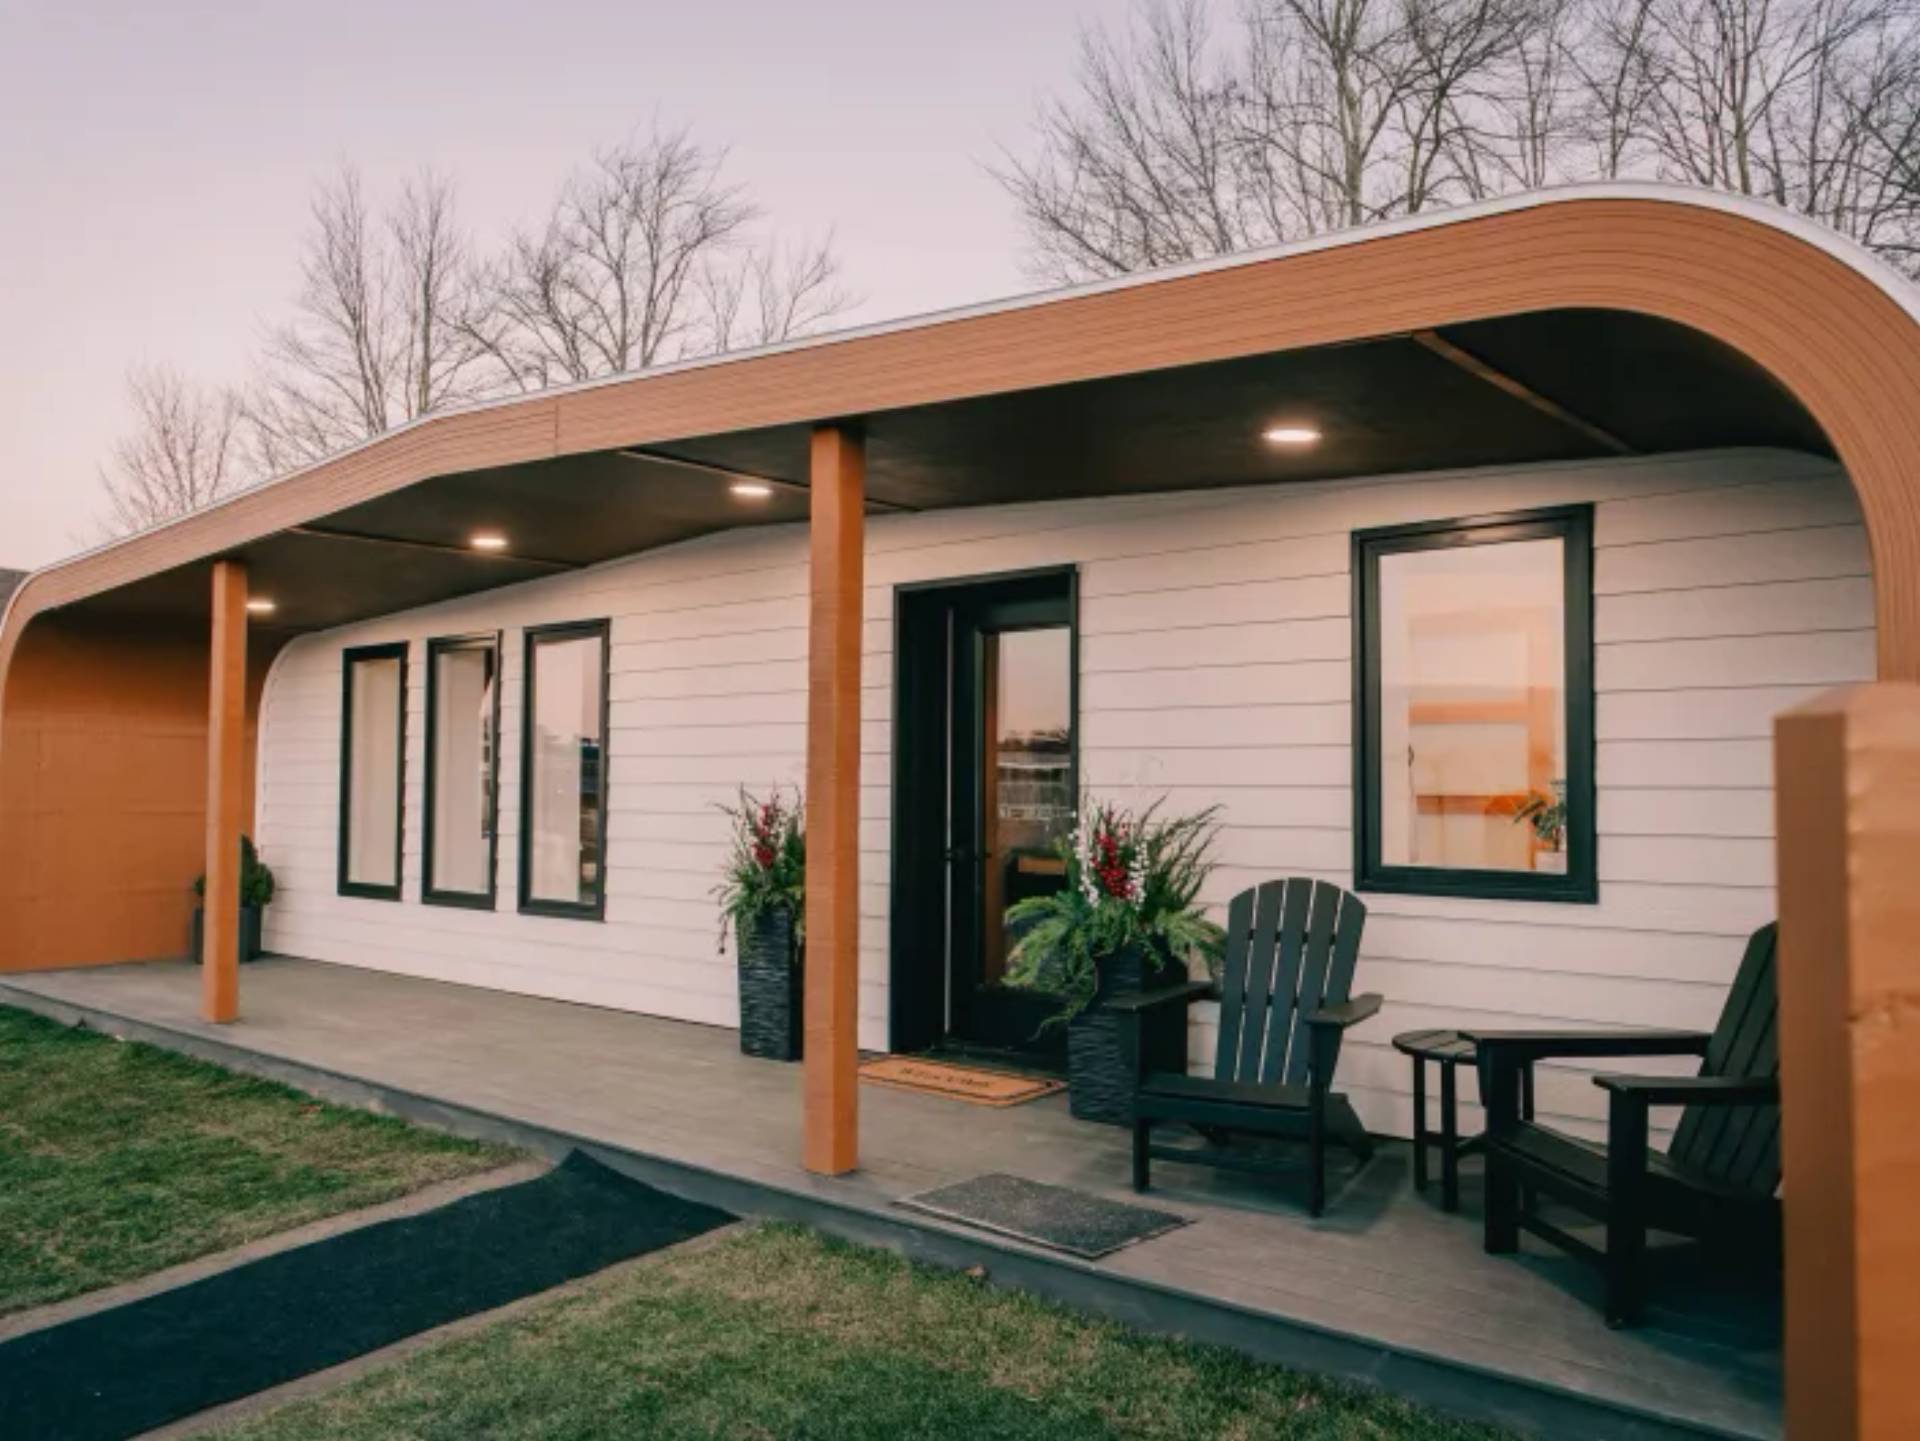 3D-printed recyclable homes tackle US housing crisis